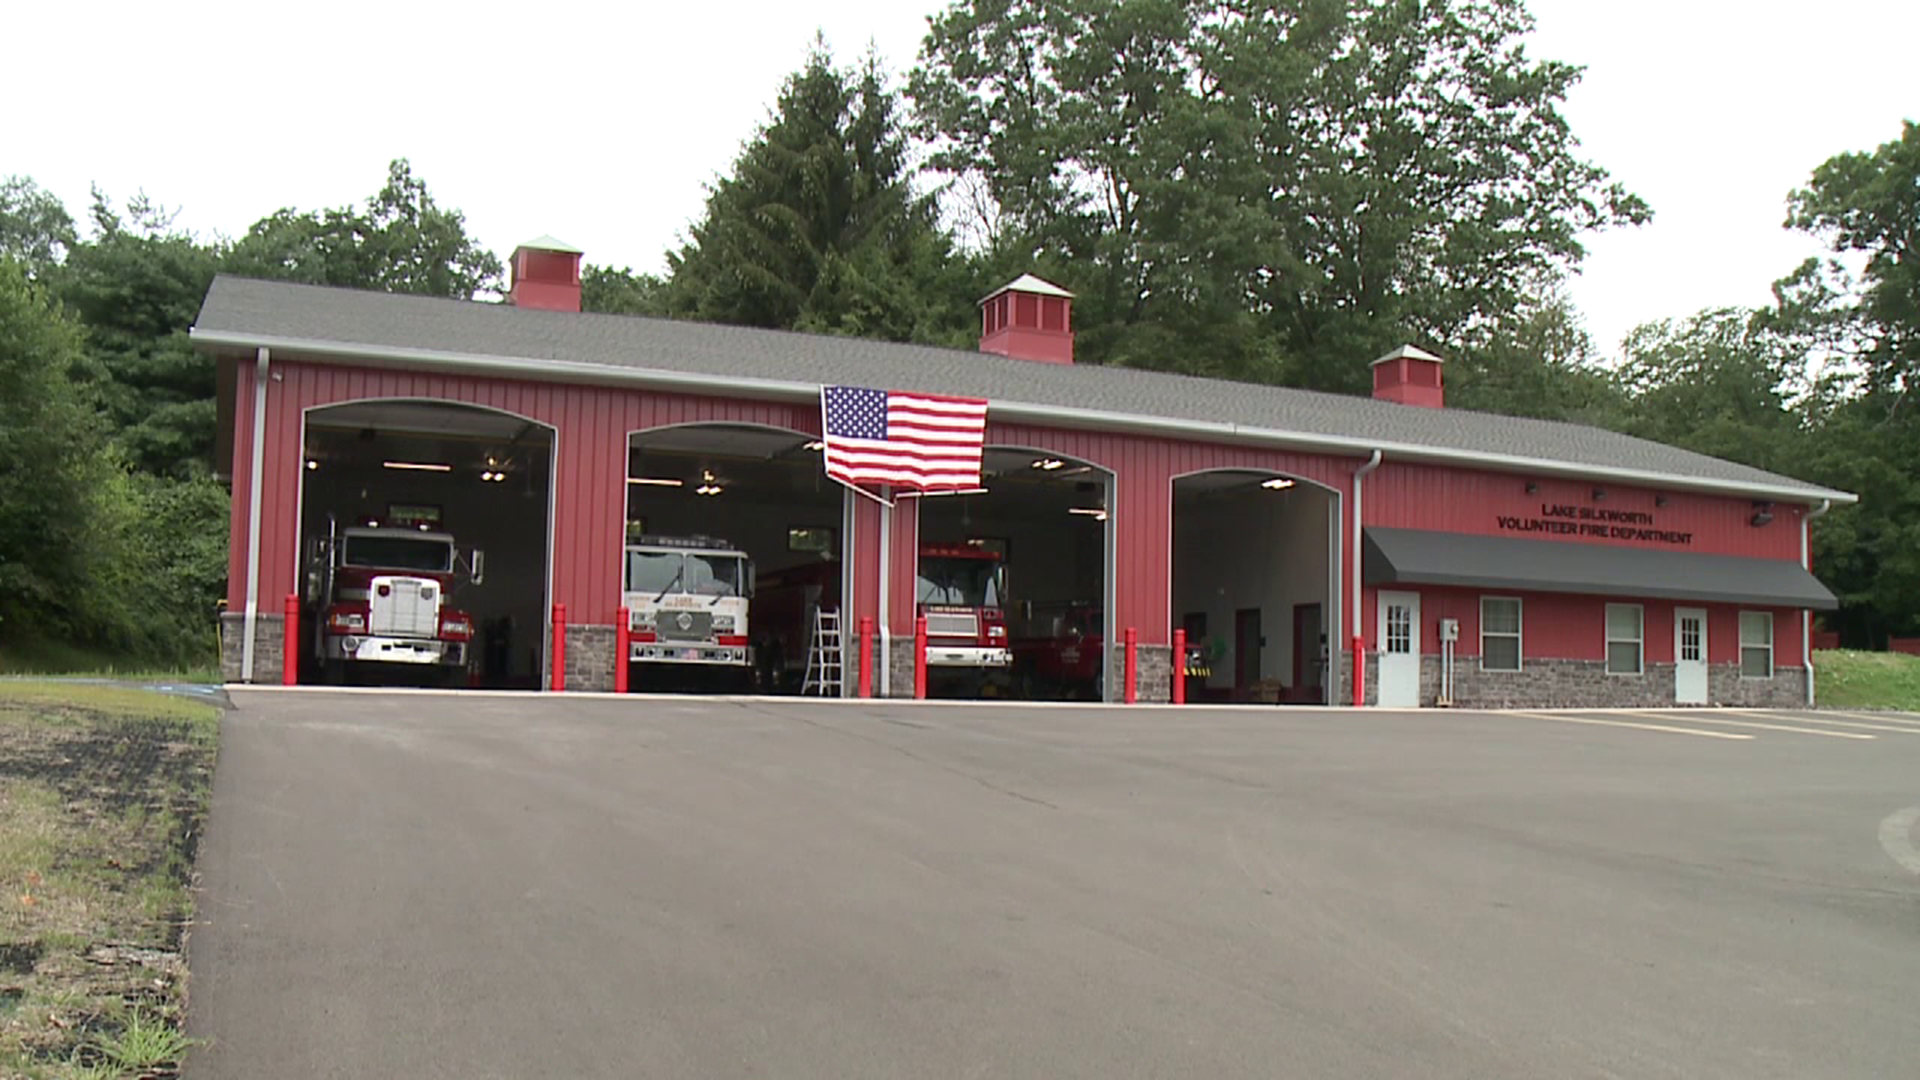 The department was given a $10,000 grant from the Department of Conservation and Natural Resources for a new brush truck to match their brand new fire station.